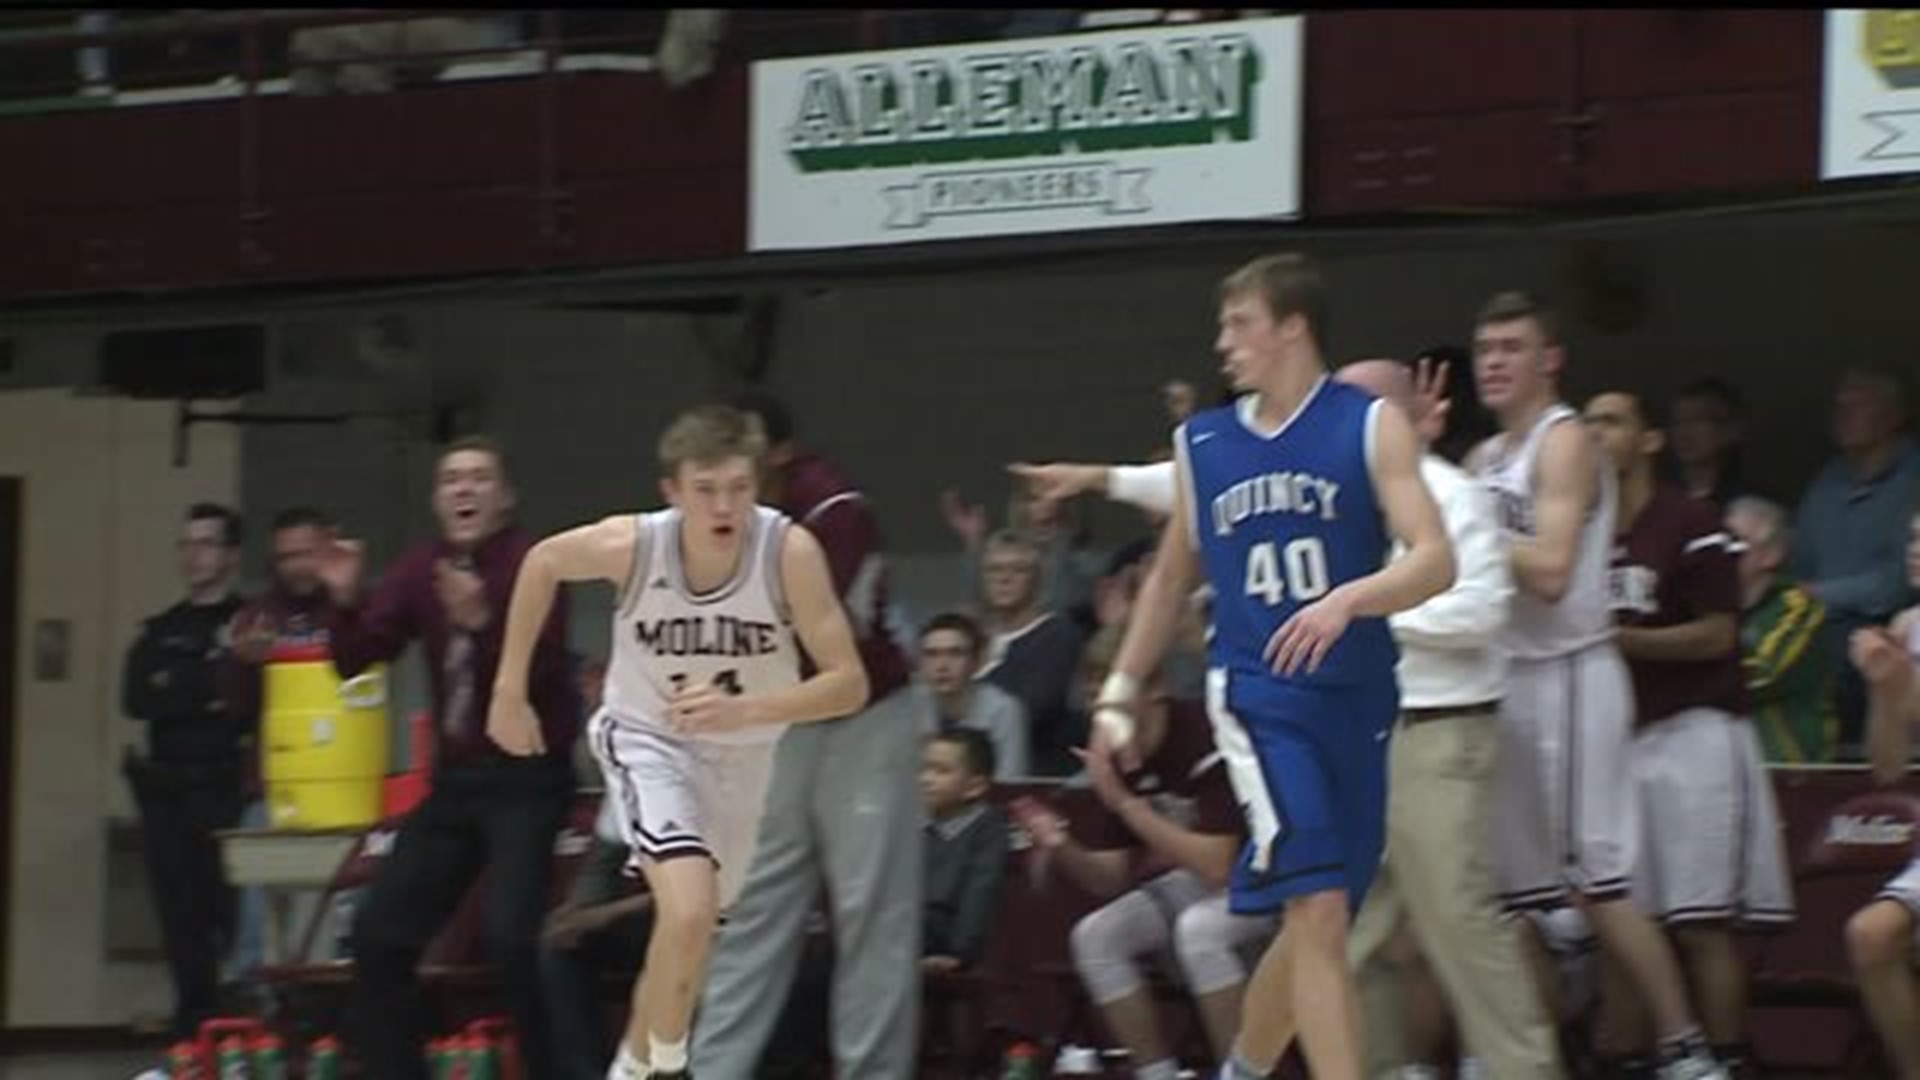 Moline falls short to Quincy